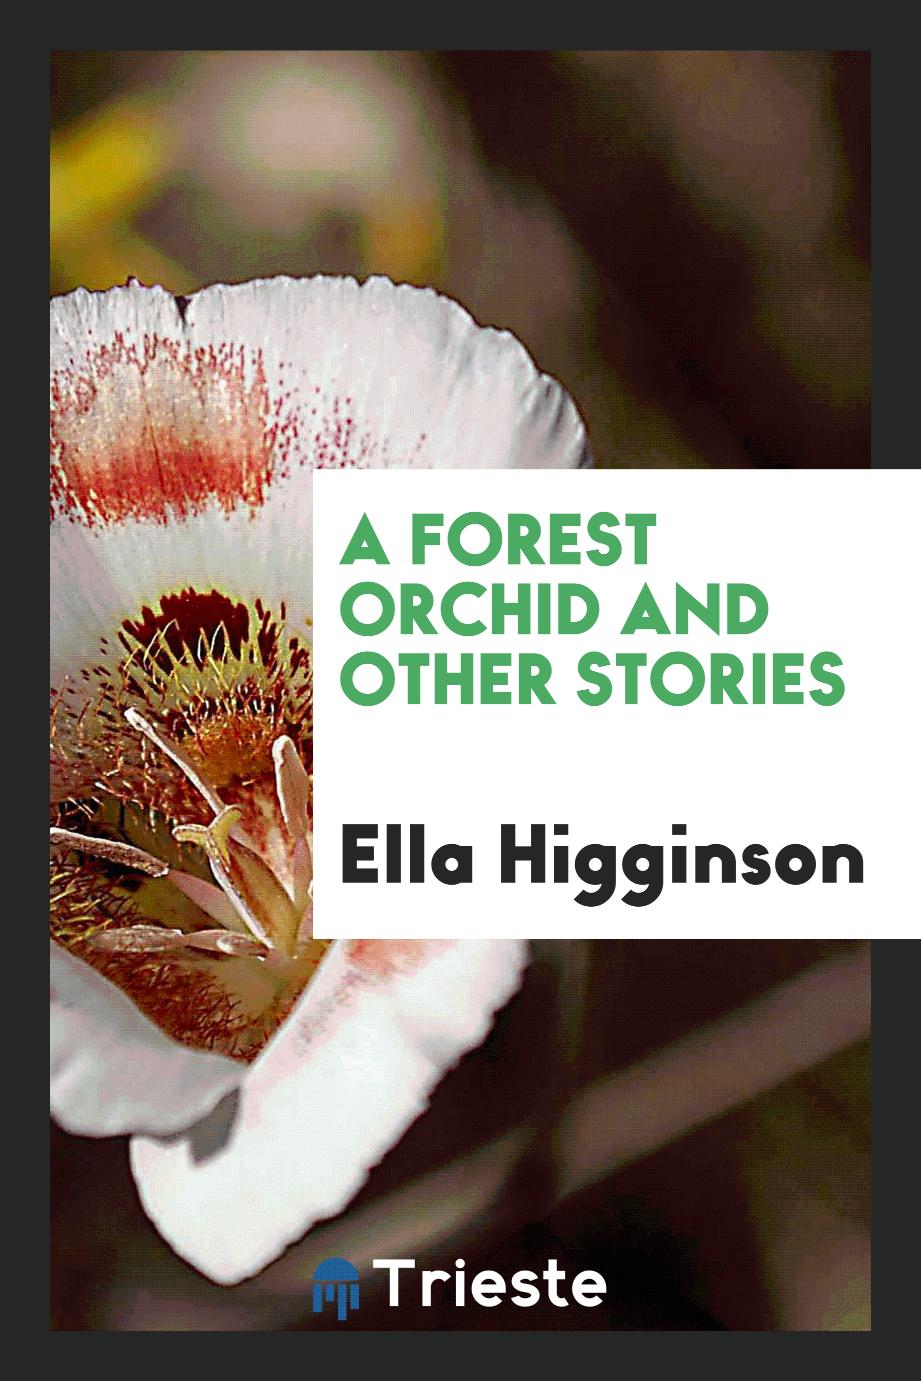 A forest orchid and other stories